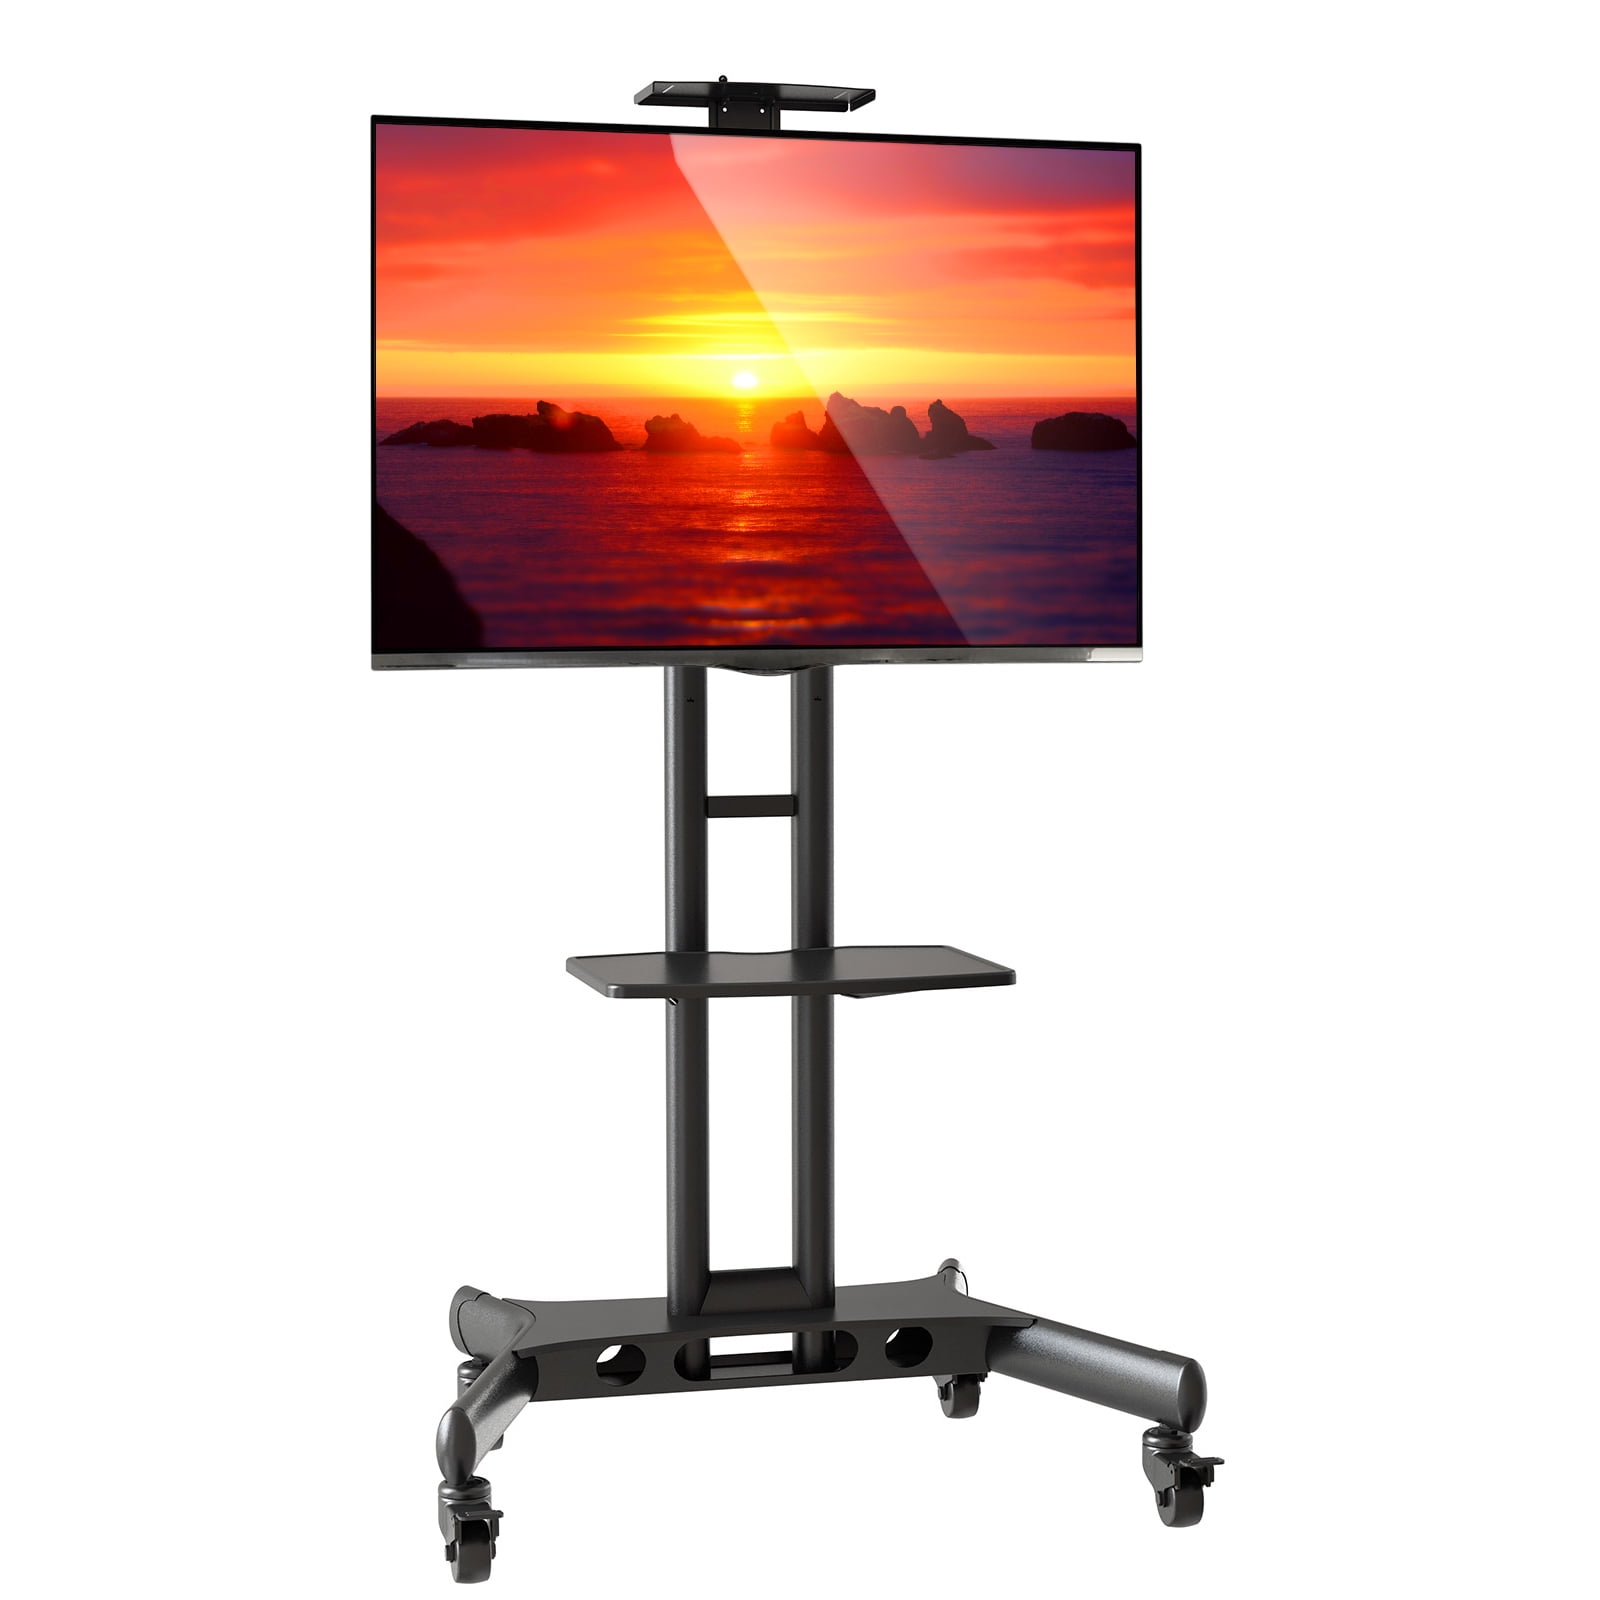 Mobile Adjustable Black Glass TV Stand W/ Bracket for 32 to 65 inches Plasma LCD